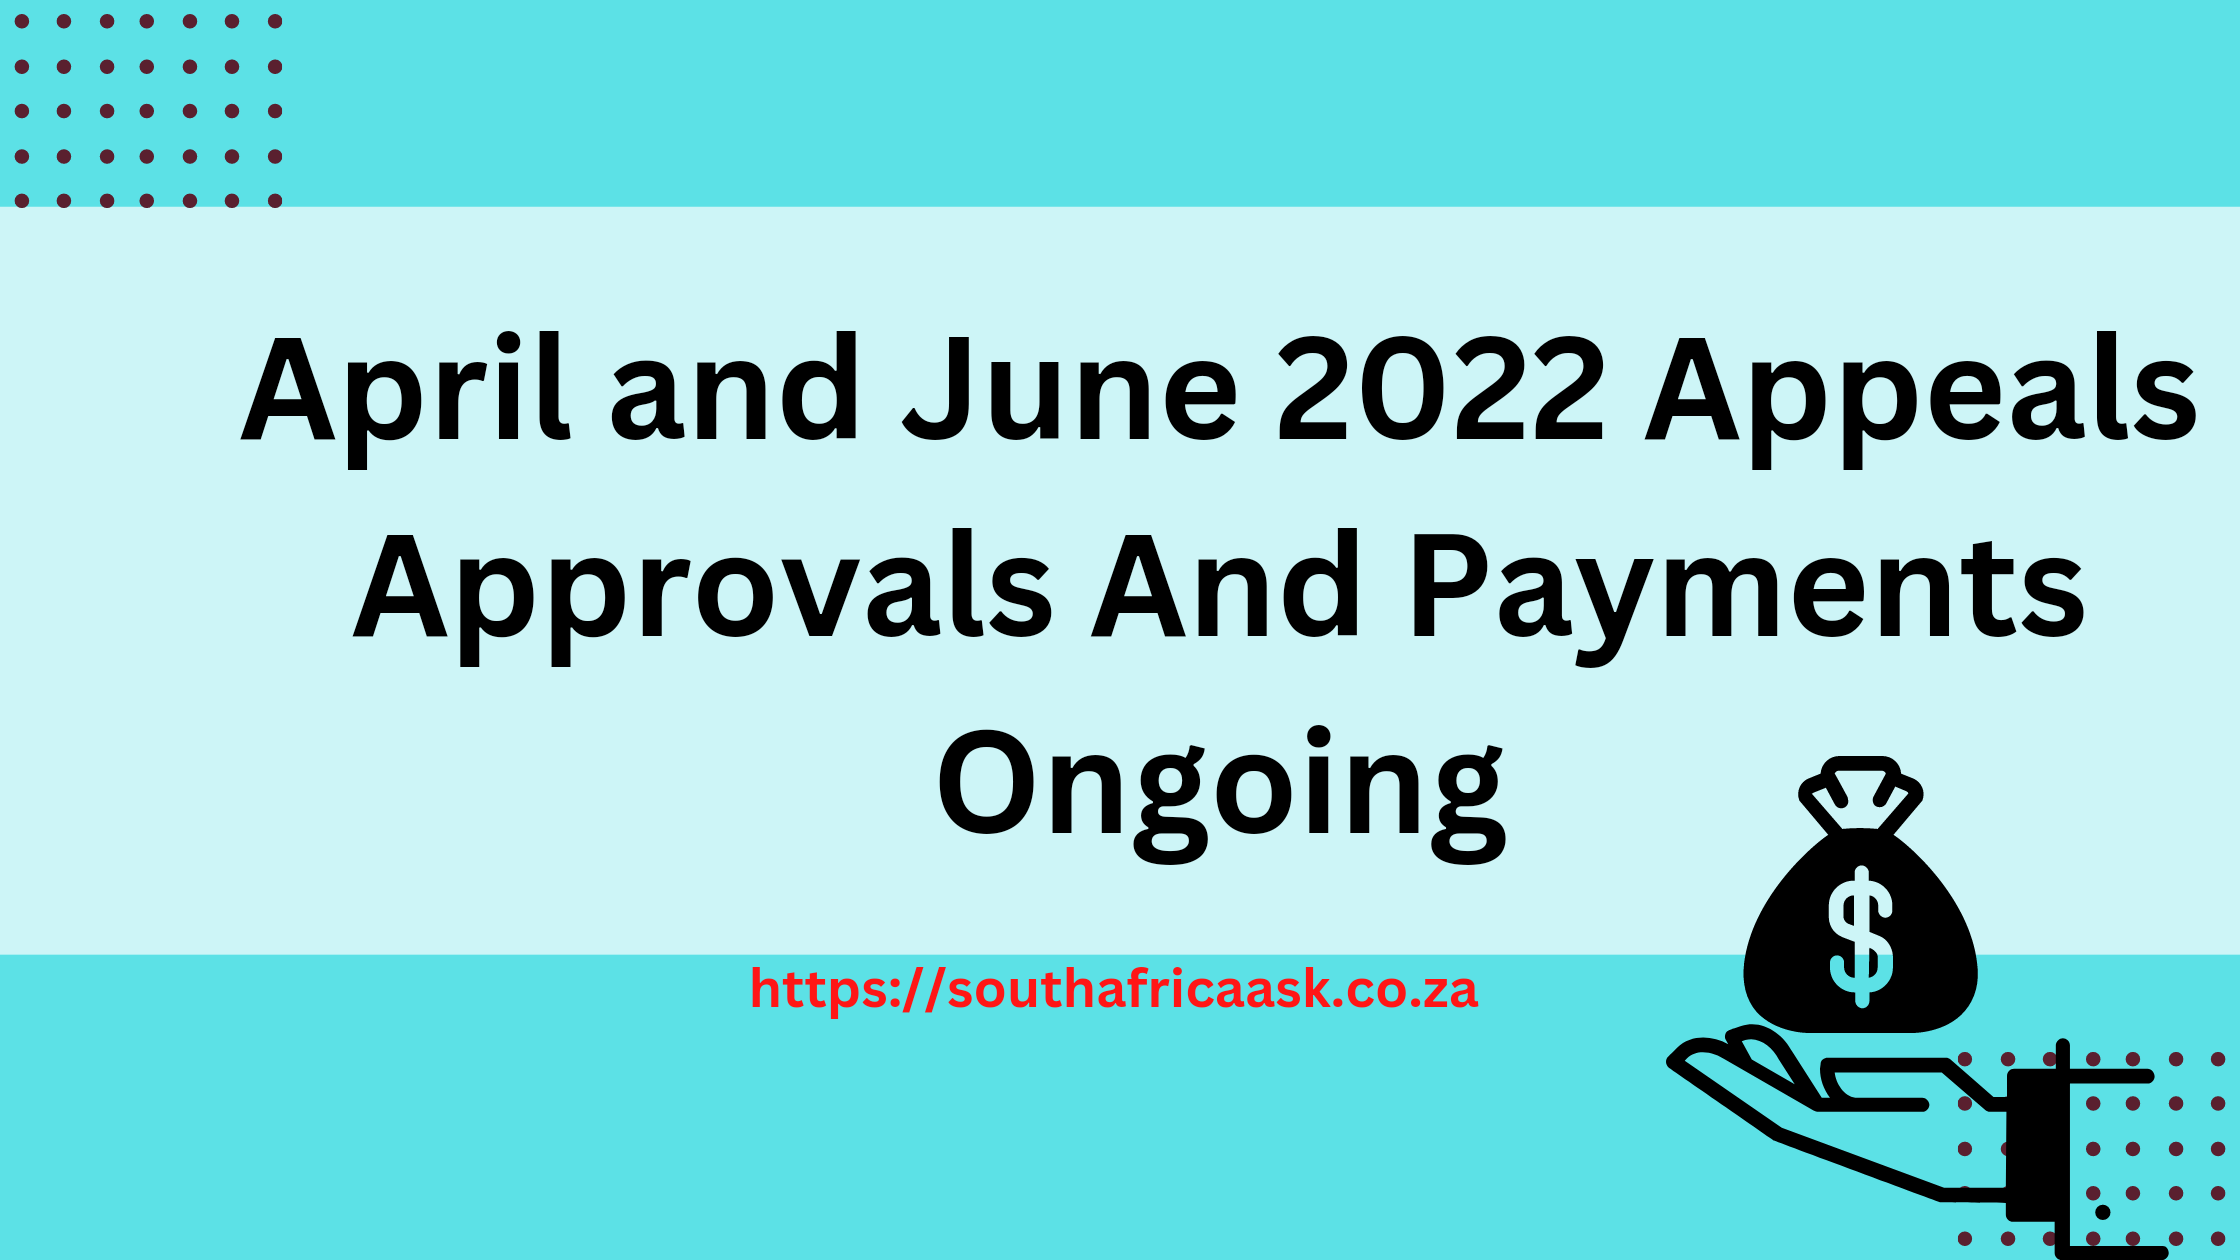 April and June 2022 Appeals Approvals And Payments Ongoing